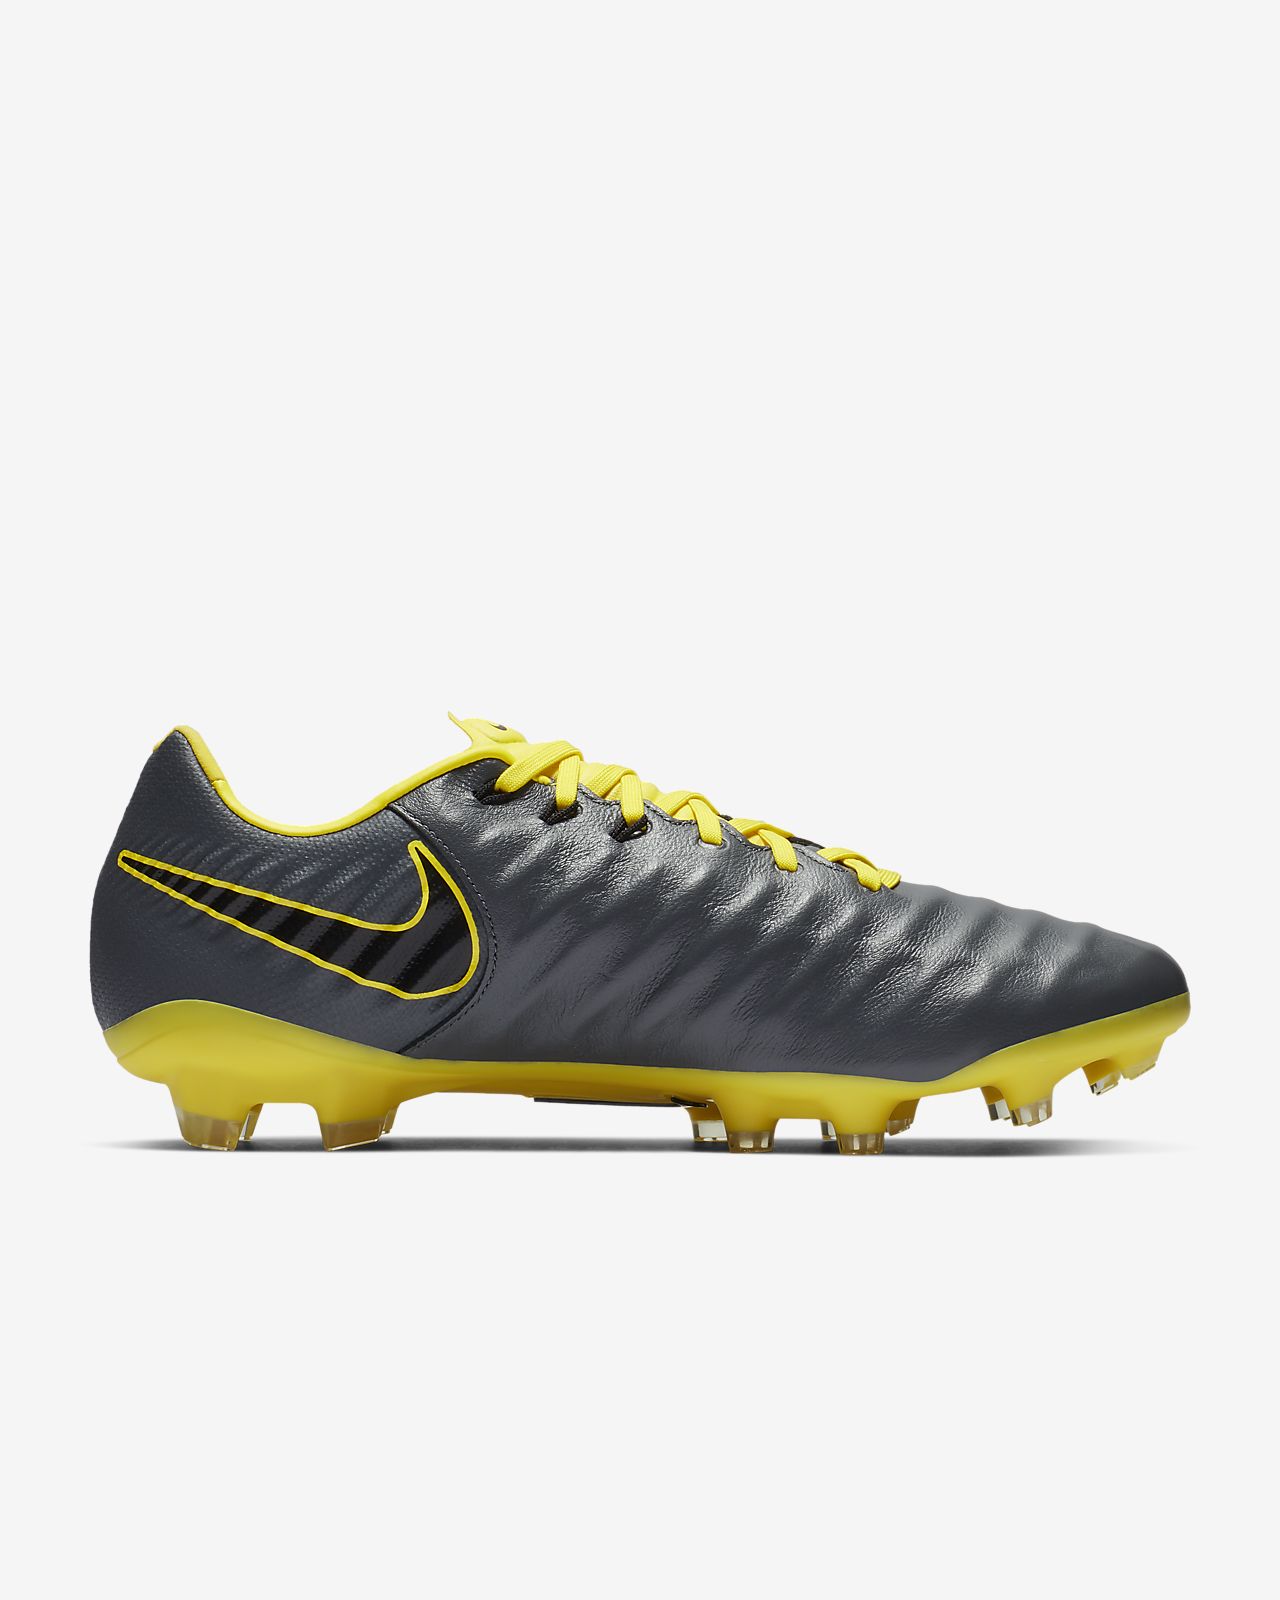 Pro FG Firm-Ground Football Boot. Nike AE